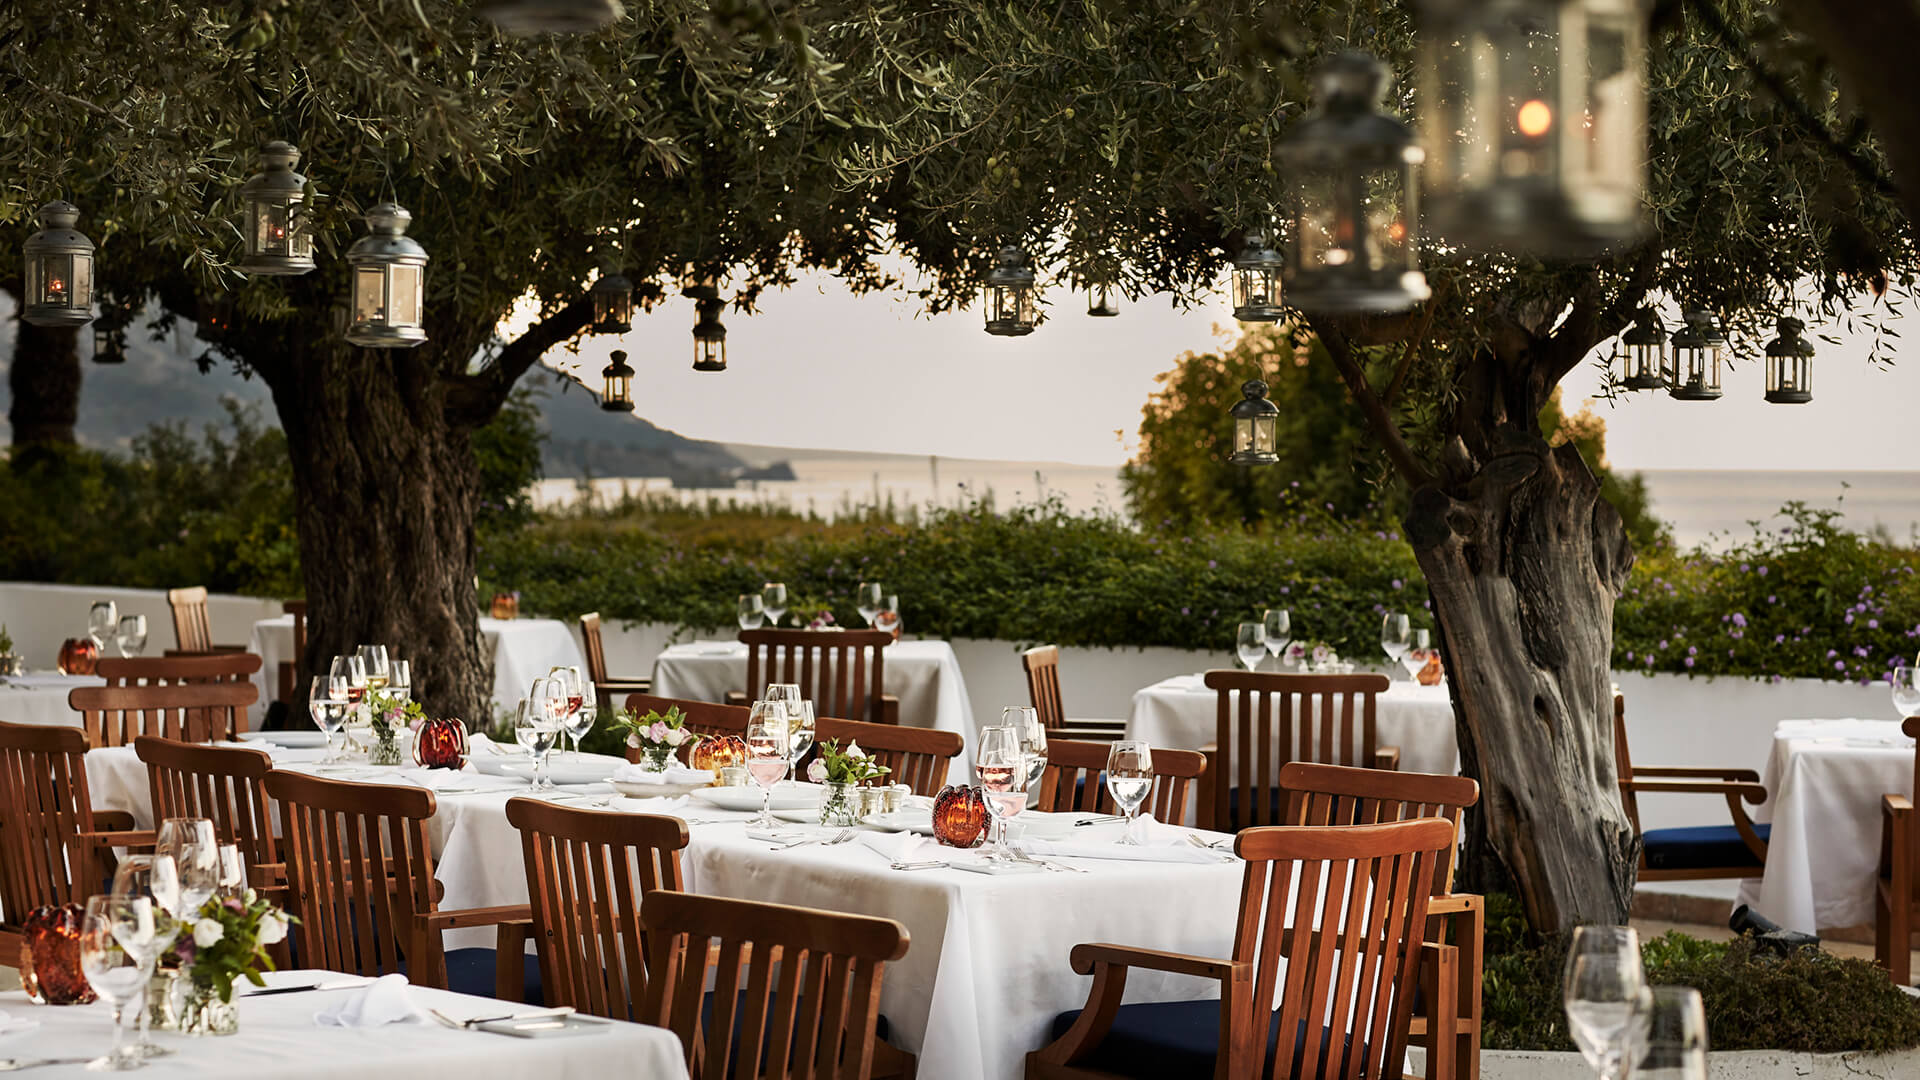 We are proud to share that we have been honored with three restaurant awards at Cyprus